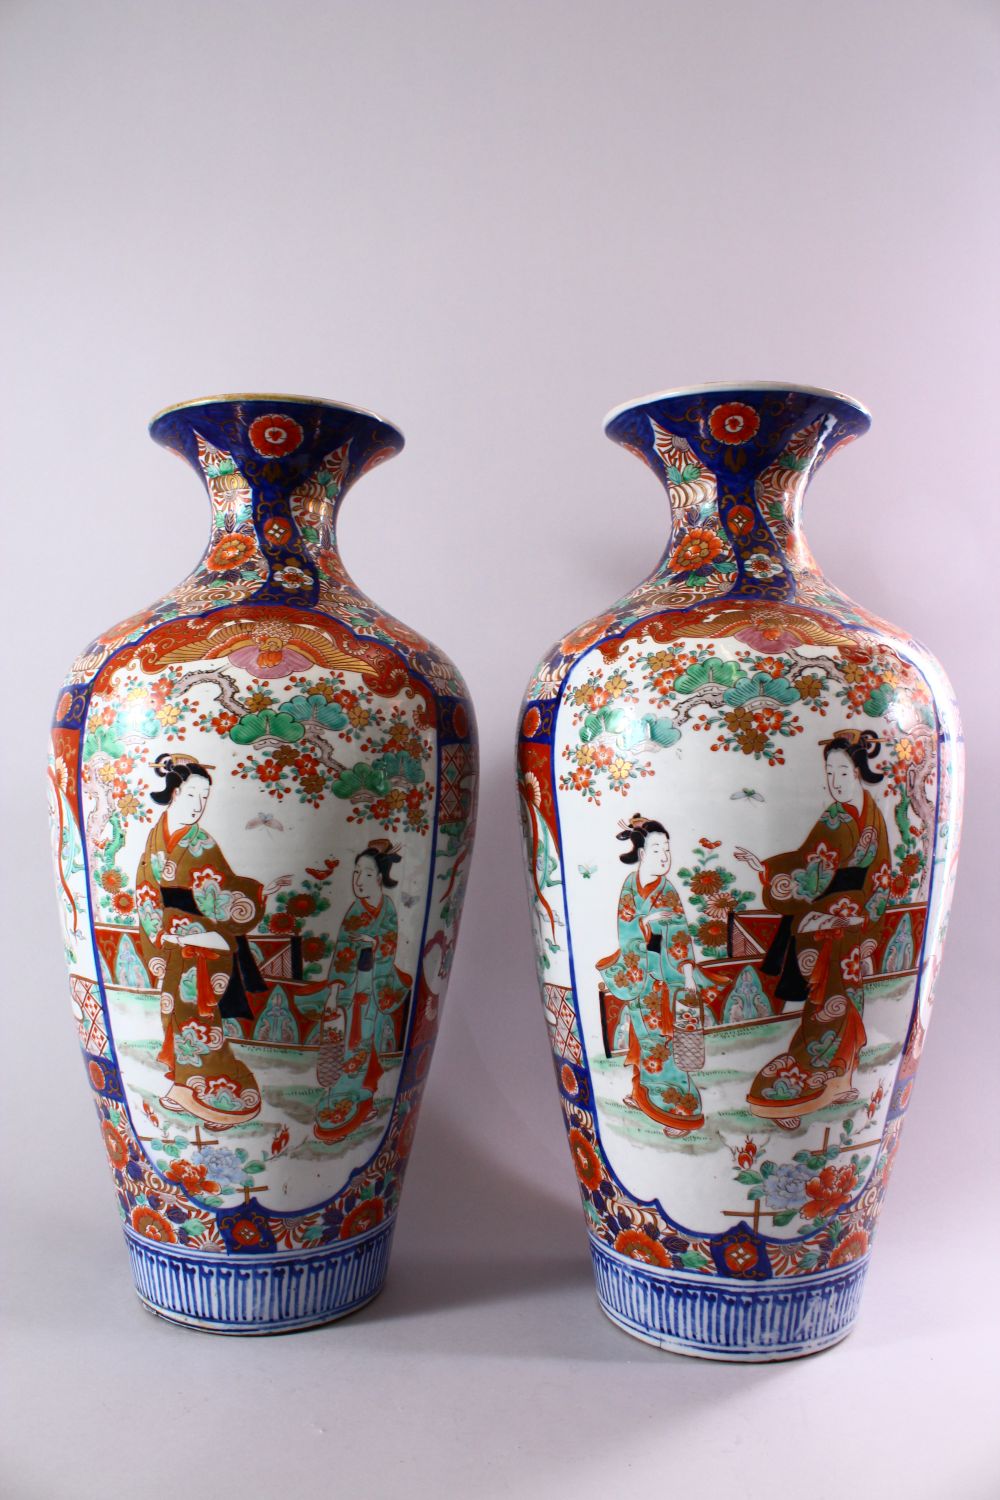 A LARGE PAIR OF JAPANESE MEIJI PERIOD IMARI PORCELAIN VASES, with panel decoration depicting figures - Image 5 of 6